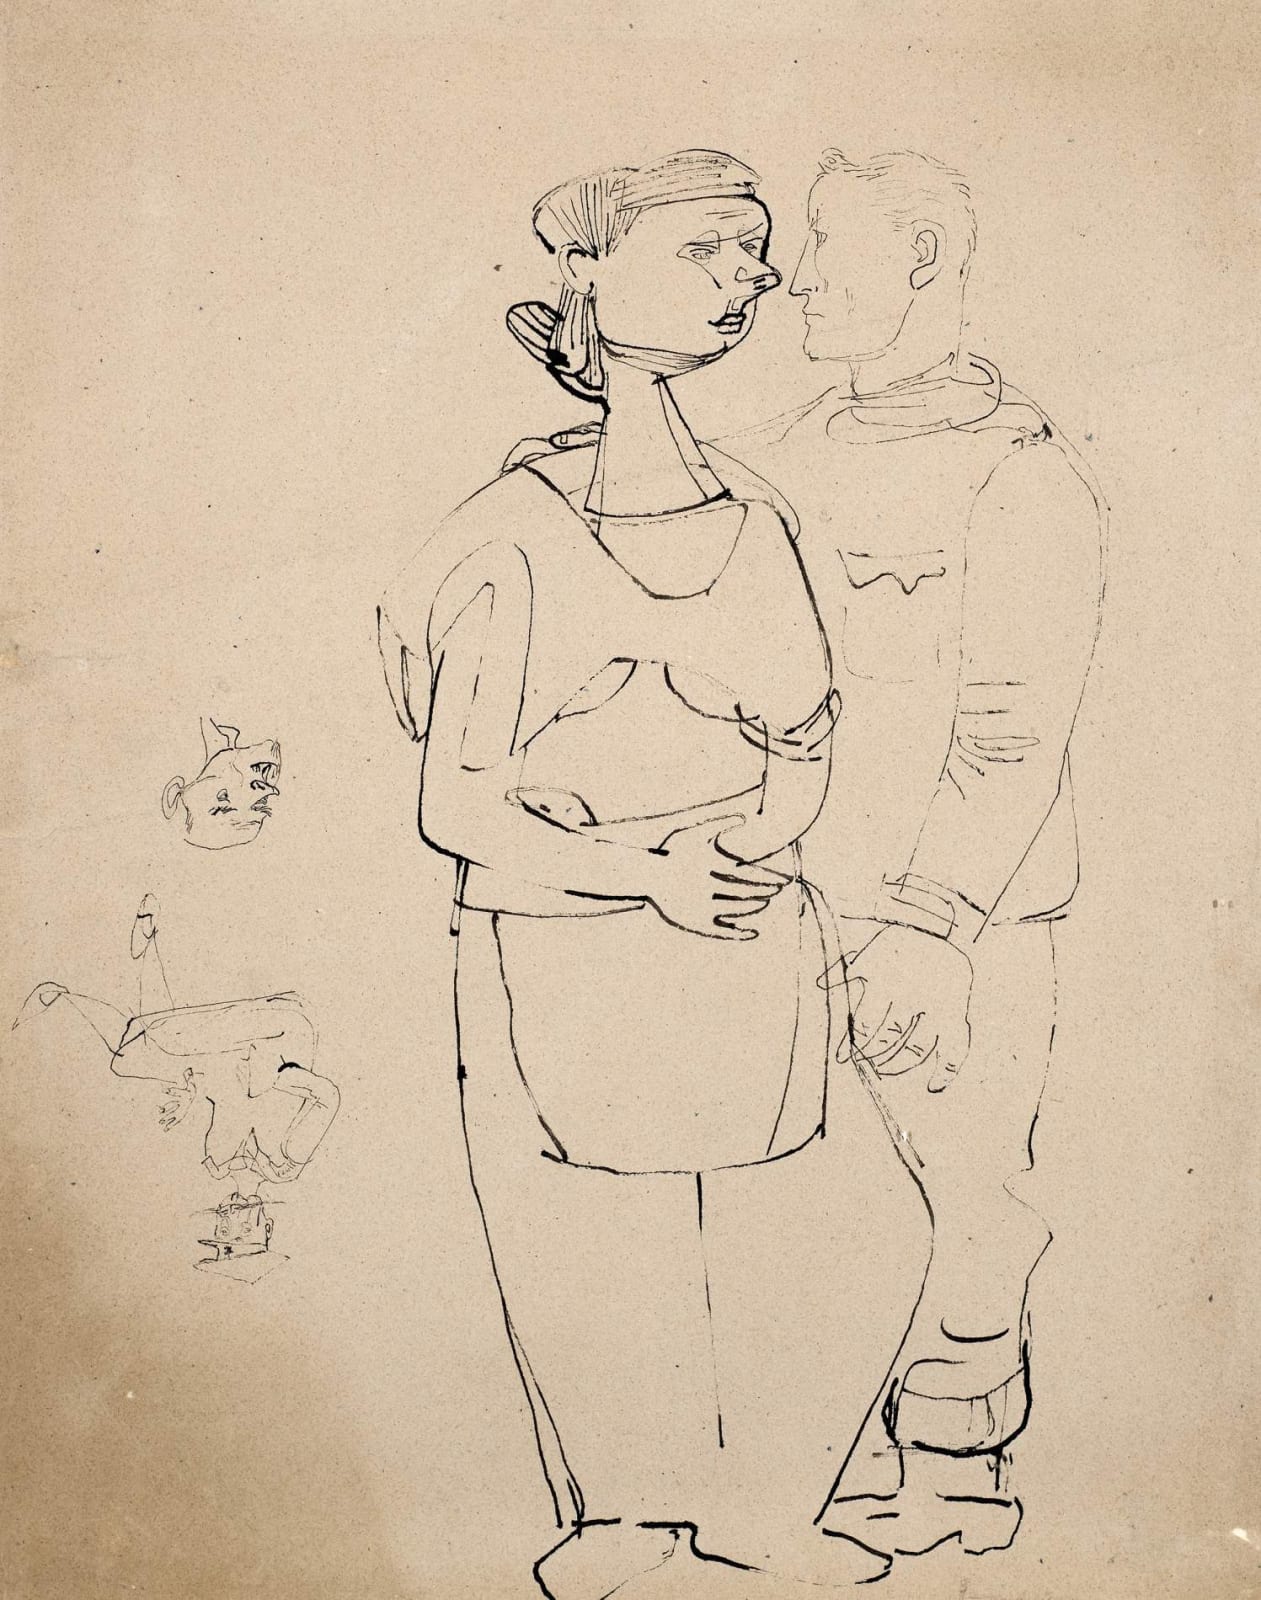 Jankel Adler (1895-1949) Self Portrait with Head by Ludwig Meidner c.1943-45 Pen and ink on paper 51.5 x 40.5 cm Private Collection To see and discover more about this artist click here